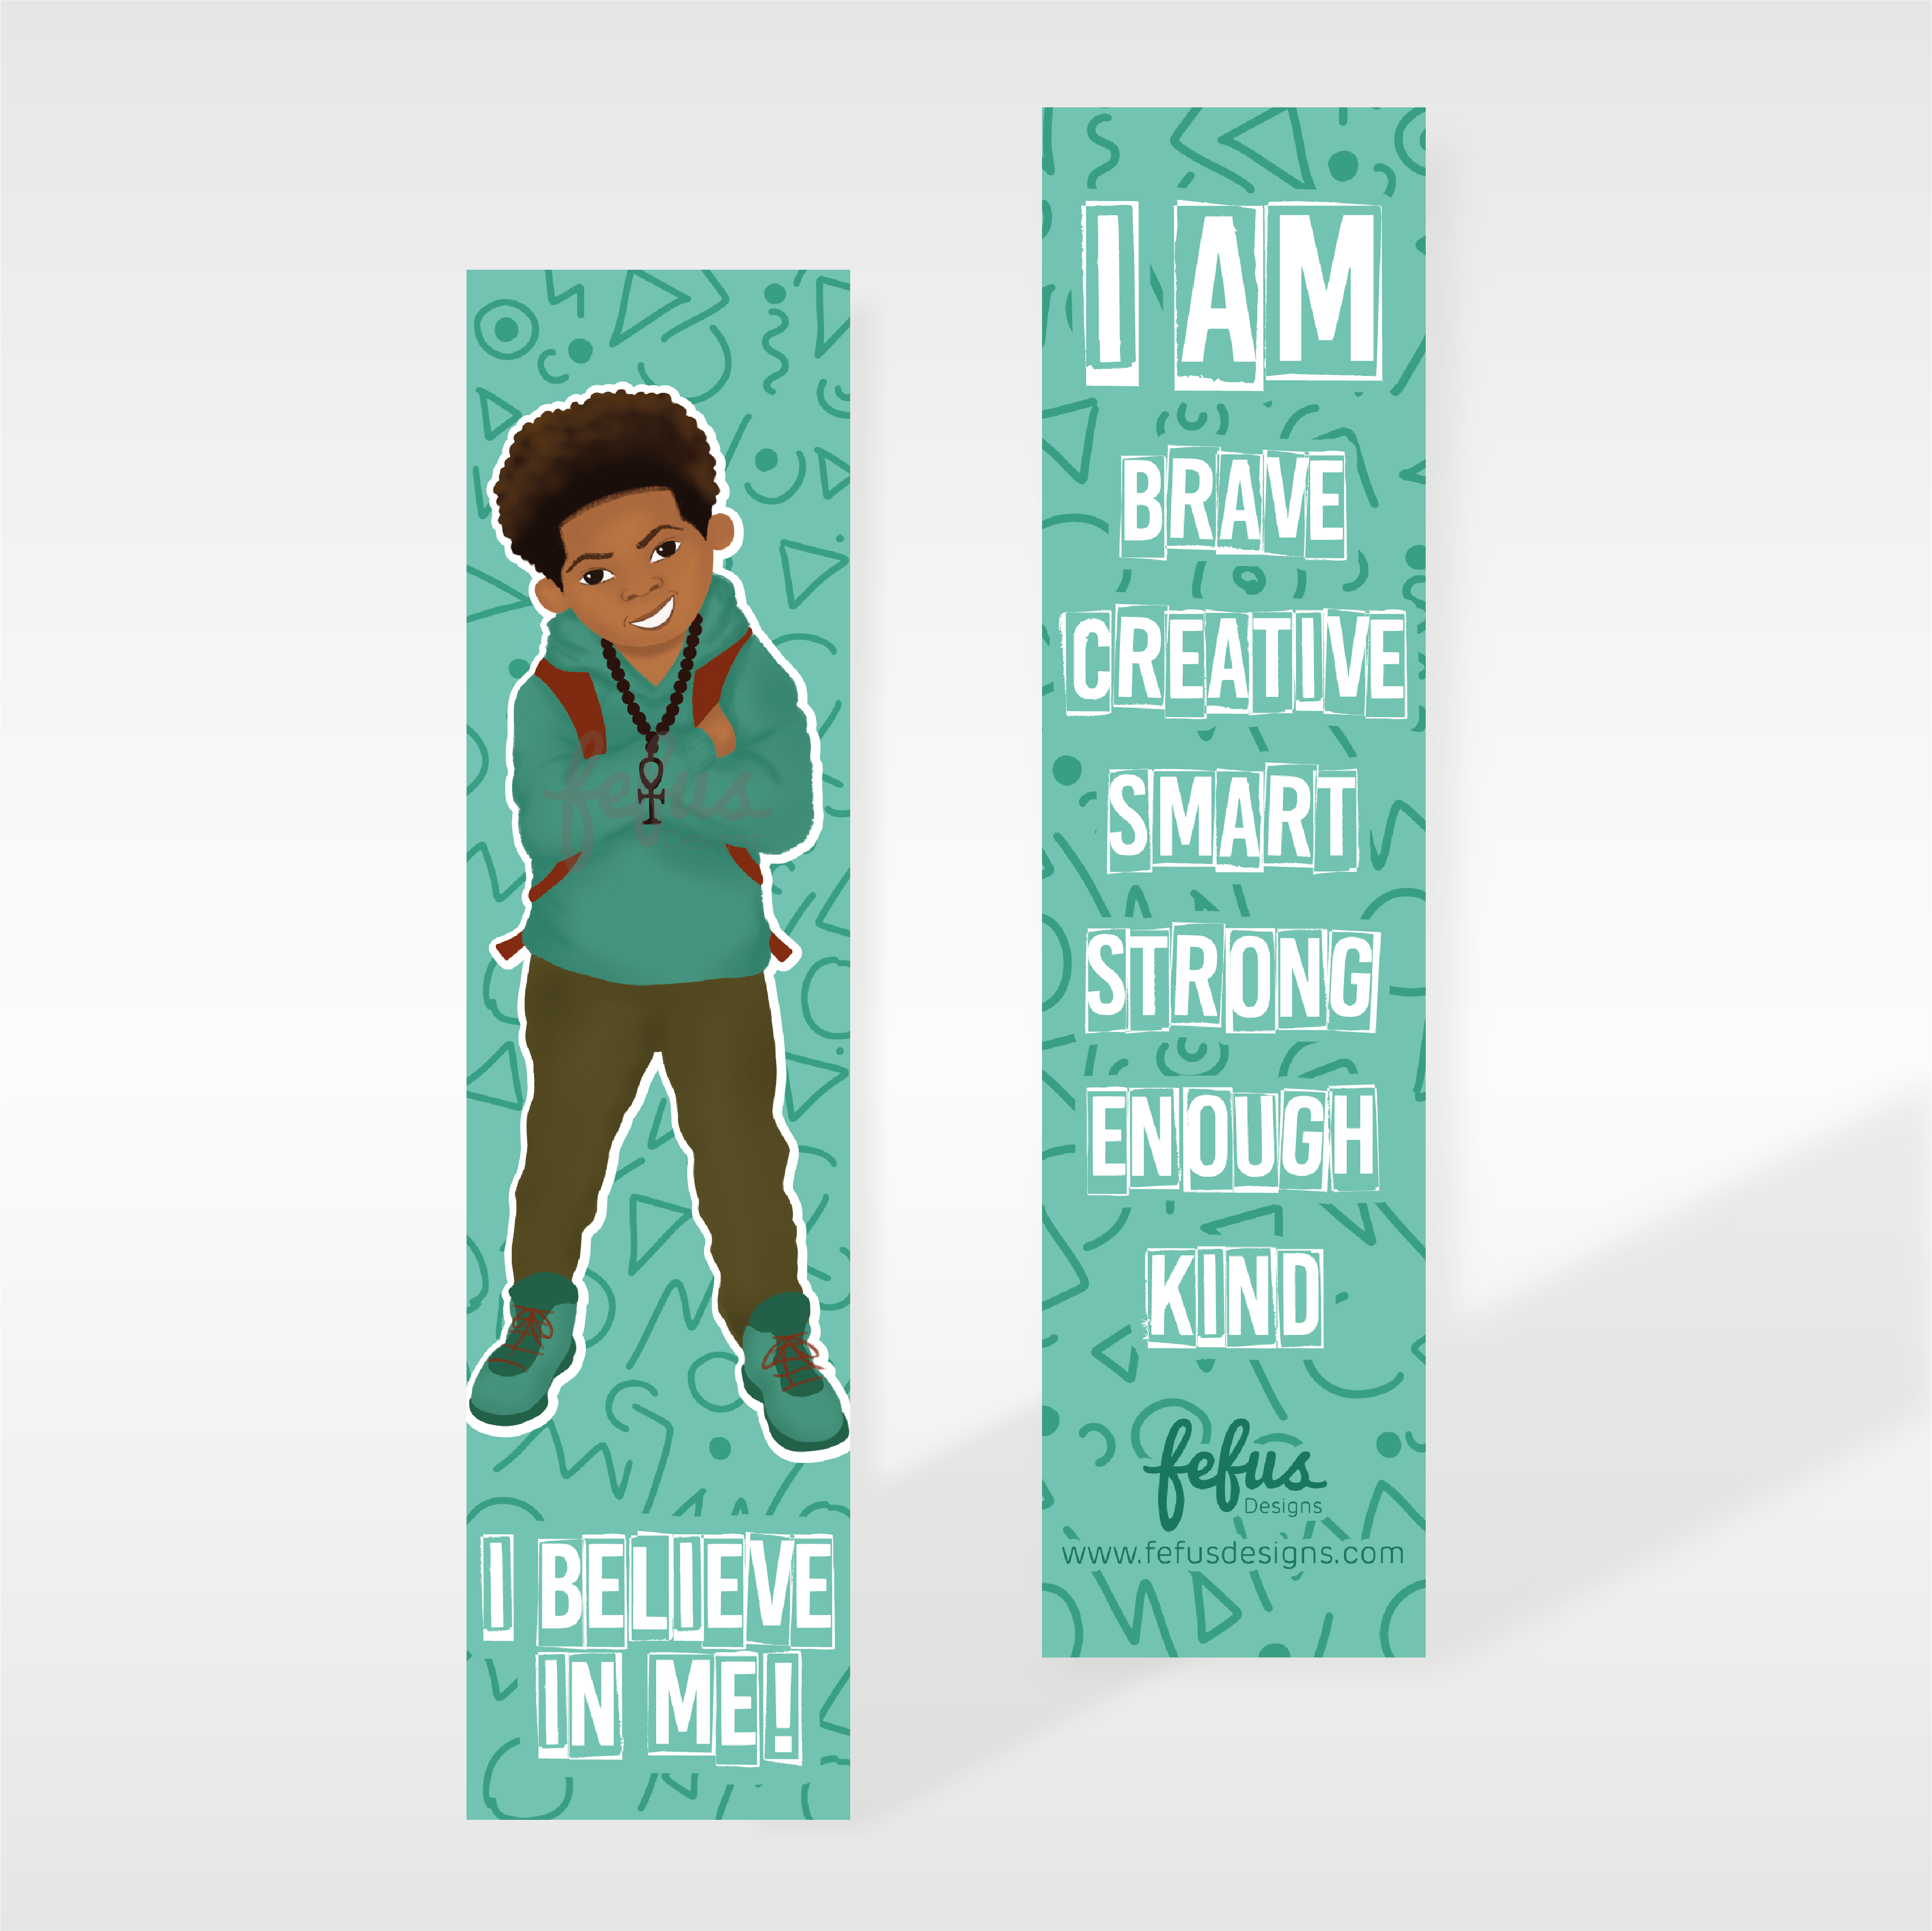 Niles - Boys I Believe in me - Mixed Race kids Bookmarks | Fefus designs